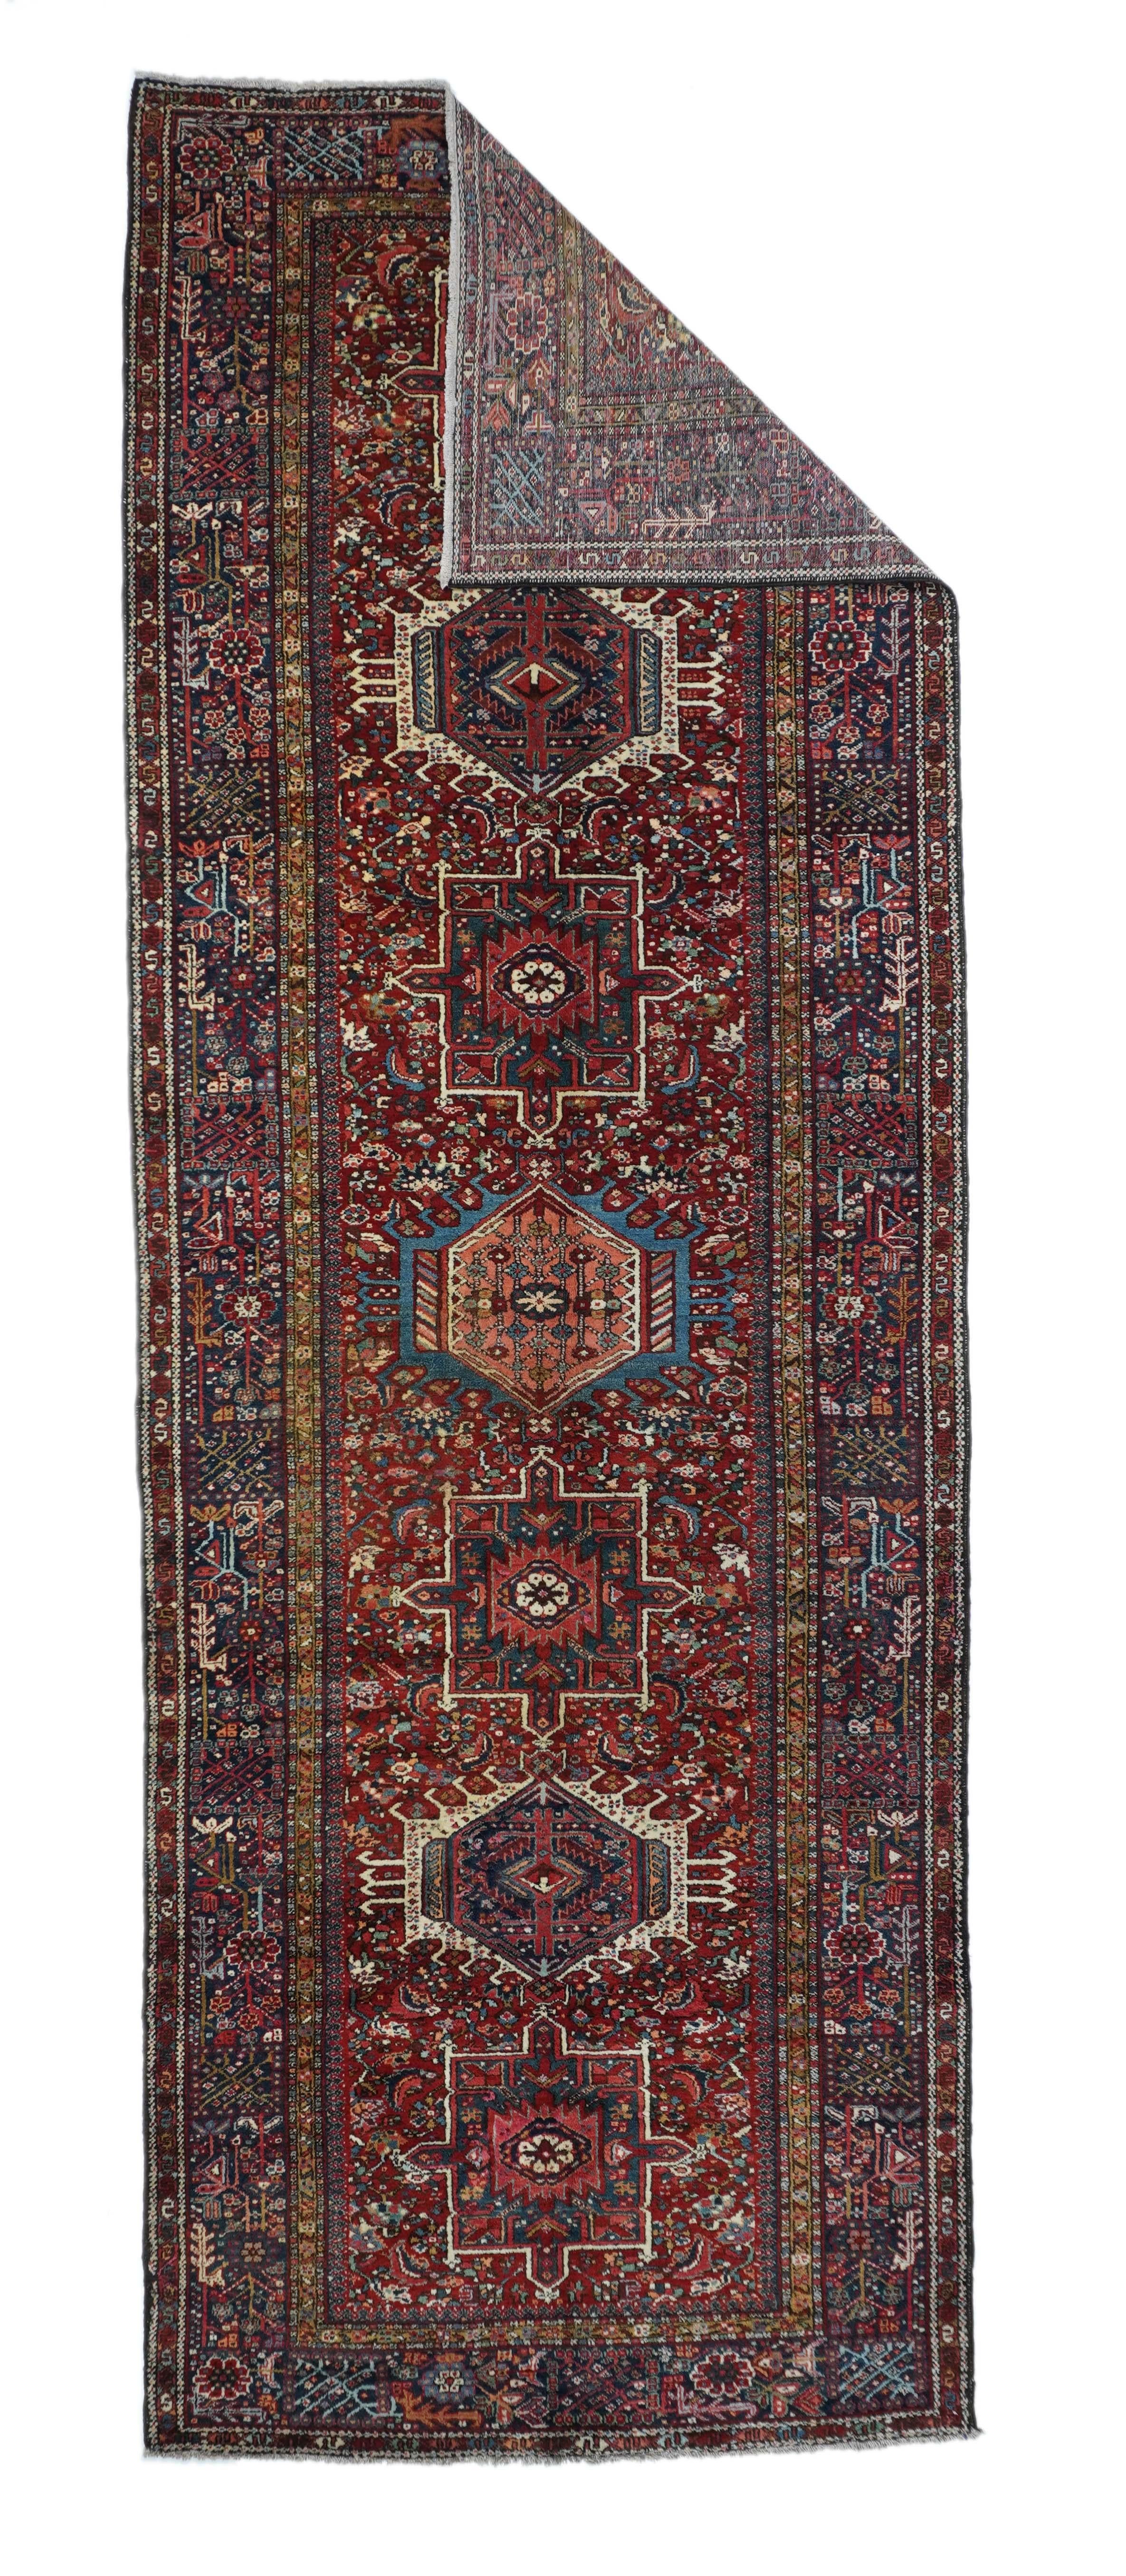 Vintage Karajeh Rug 4'8'' x 13'6''. Red field with seven alternating characteristic octogramme and hooked hexagon forms in ecru, light blue and navy. Small leaves and floral forms closely fill in the background. Navy border with herringboned leaves